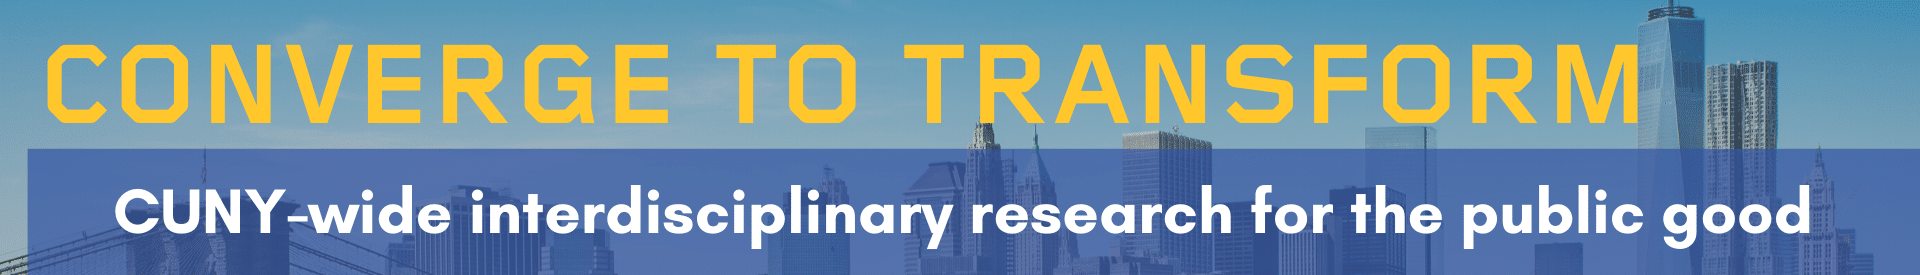 Converge to Transform: CUNY-wide interdisciplinary research for the public good